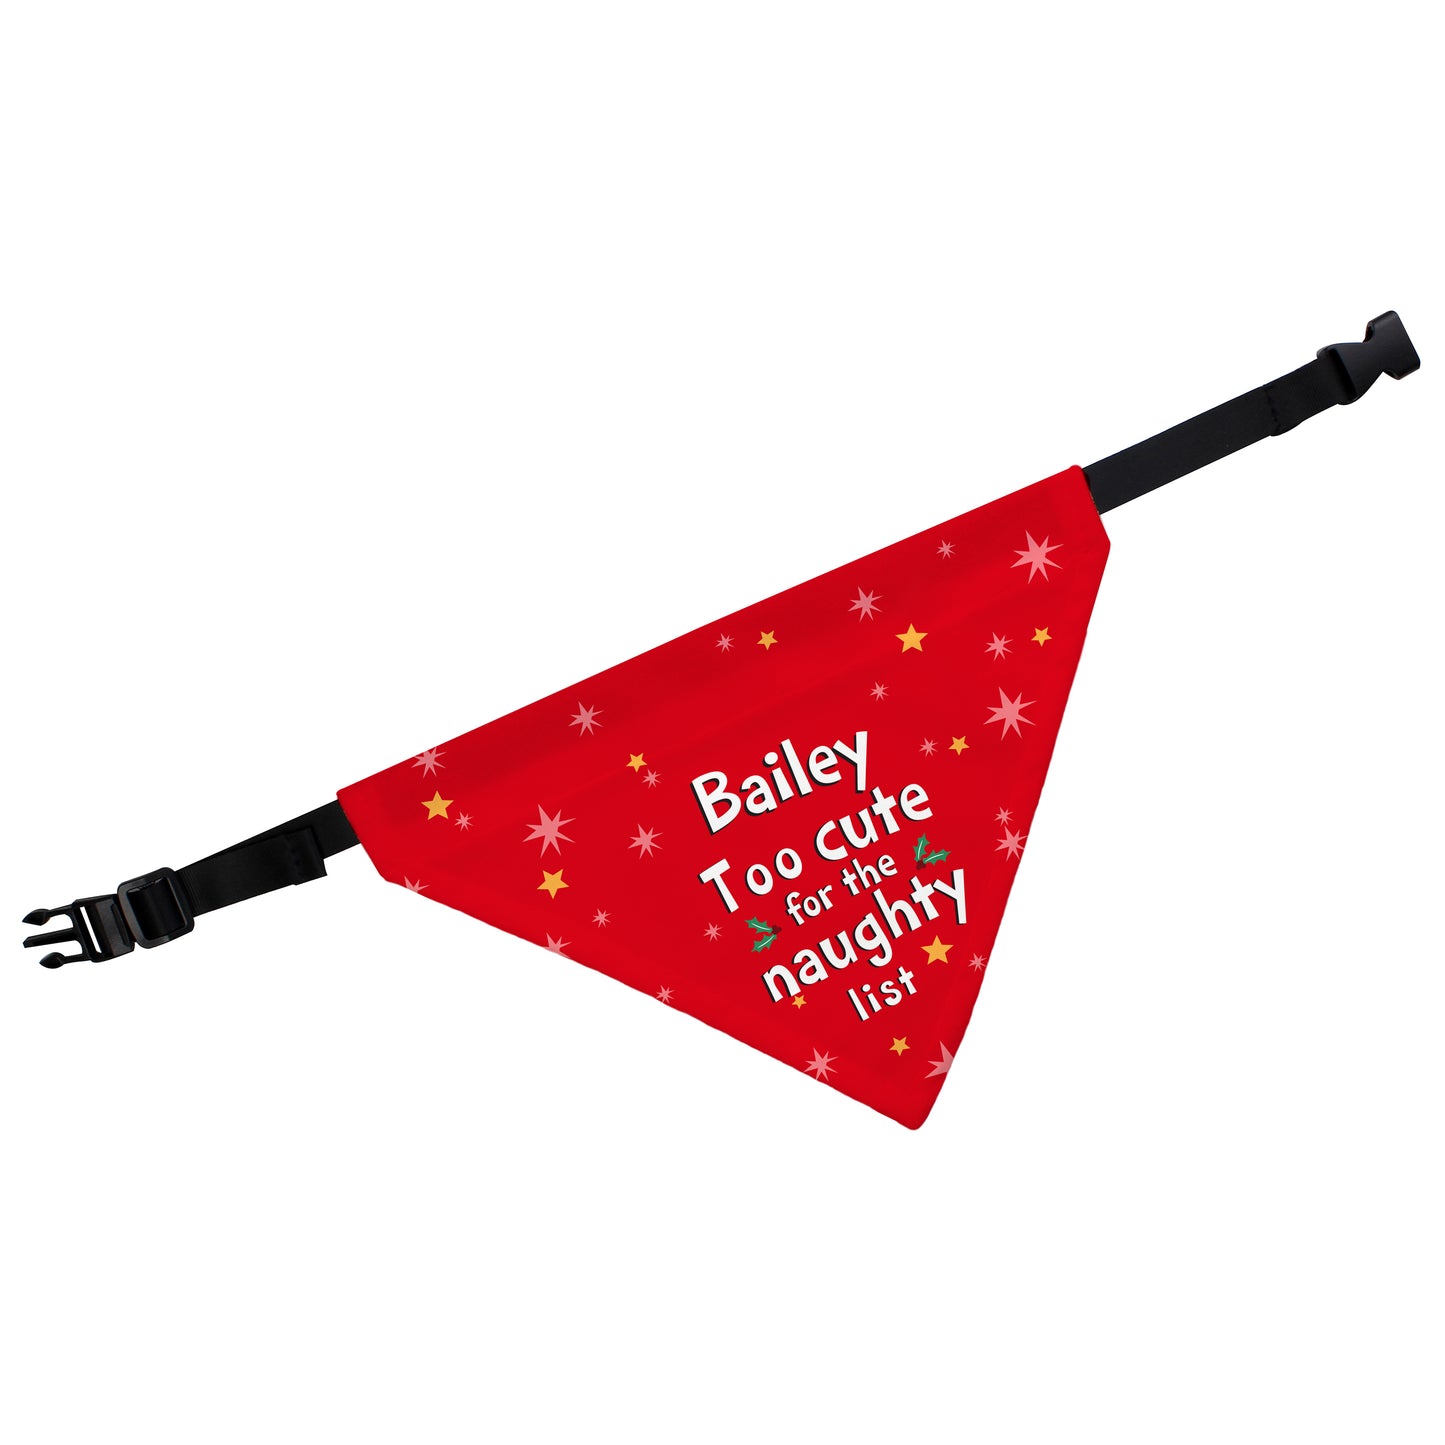 Personalised 'Too cute for the naughty list' Dog Bandana for Christmas